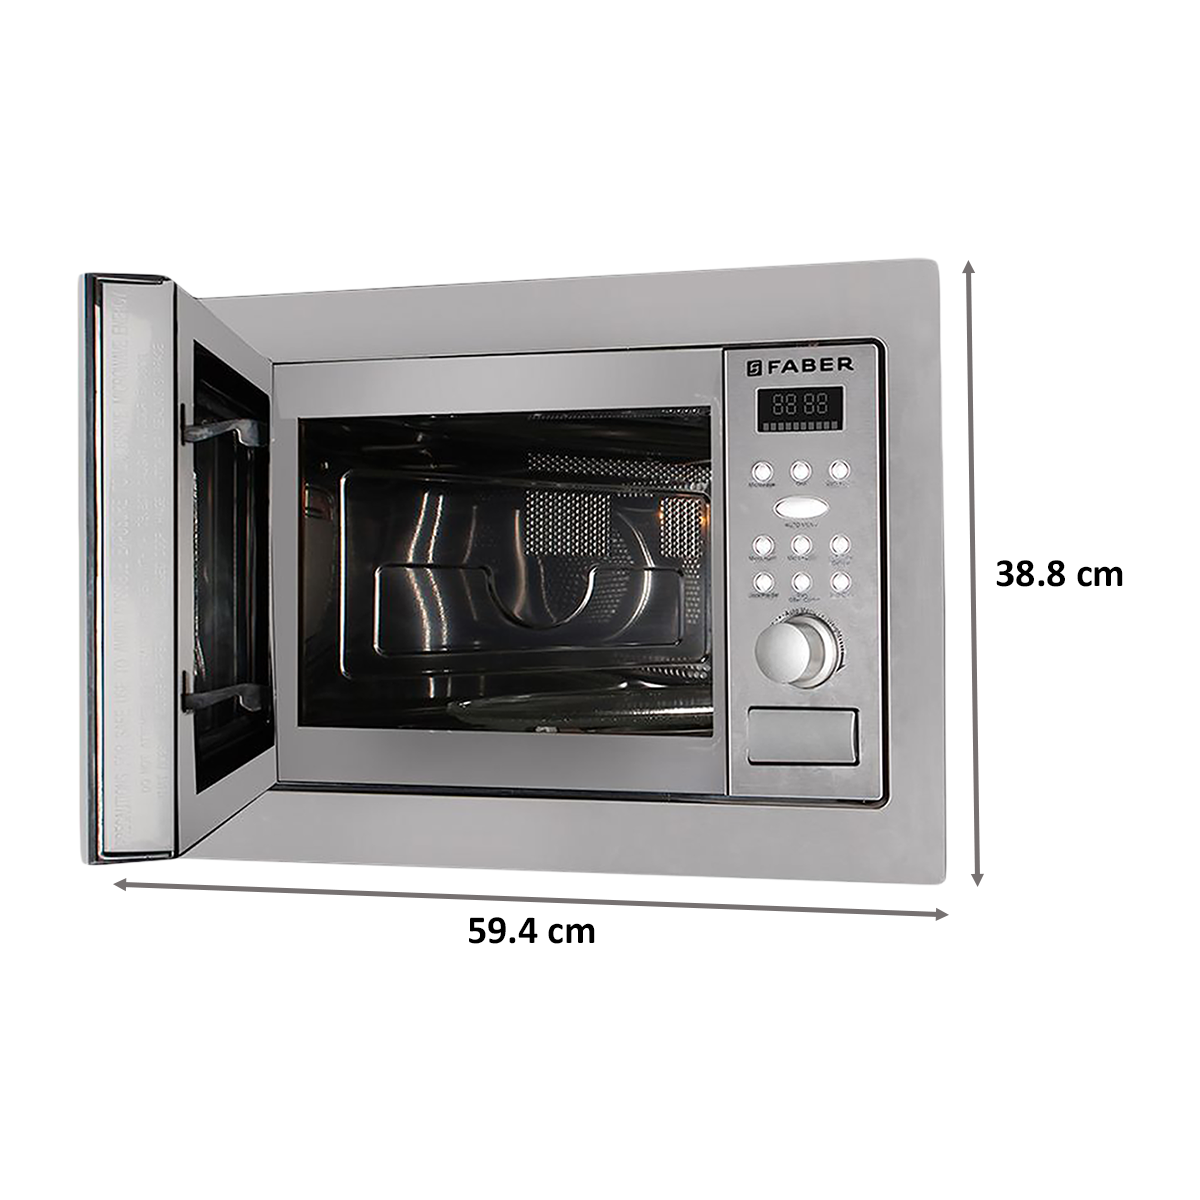 Faber 25 Litres Built-in Microwave Oven (10 Auto Cook Menus, FBI MWO 25L CGS BK, Stainless Steel)_2